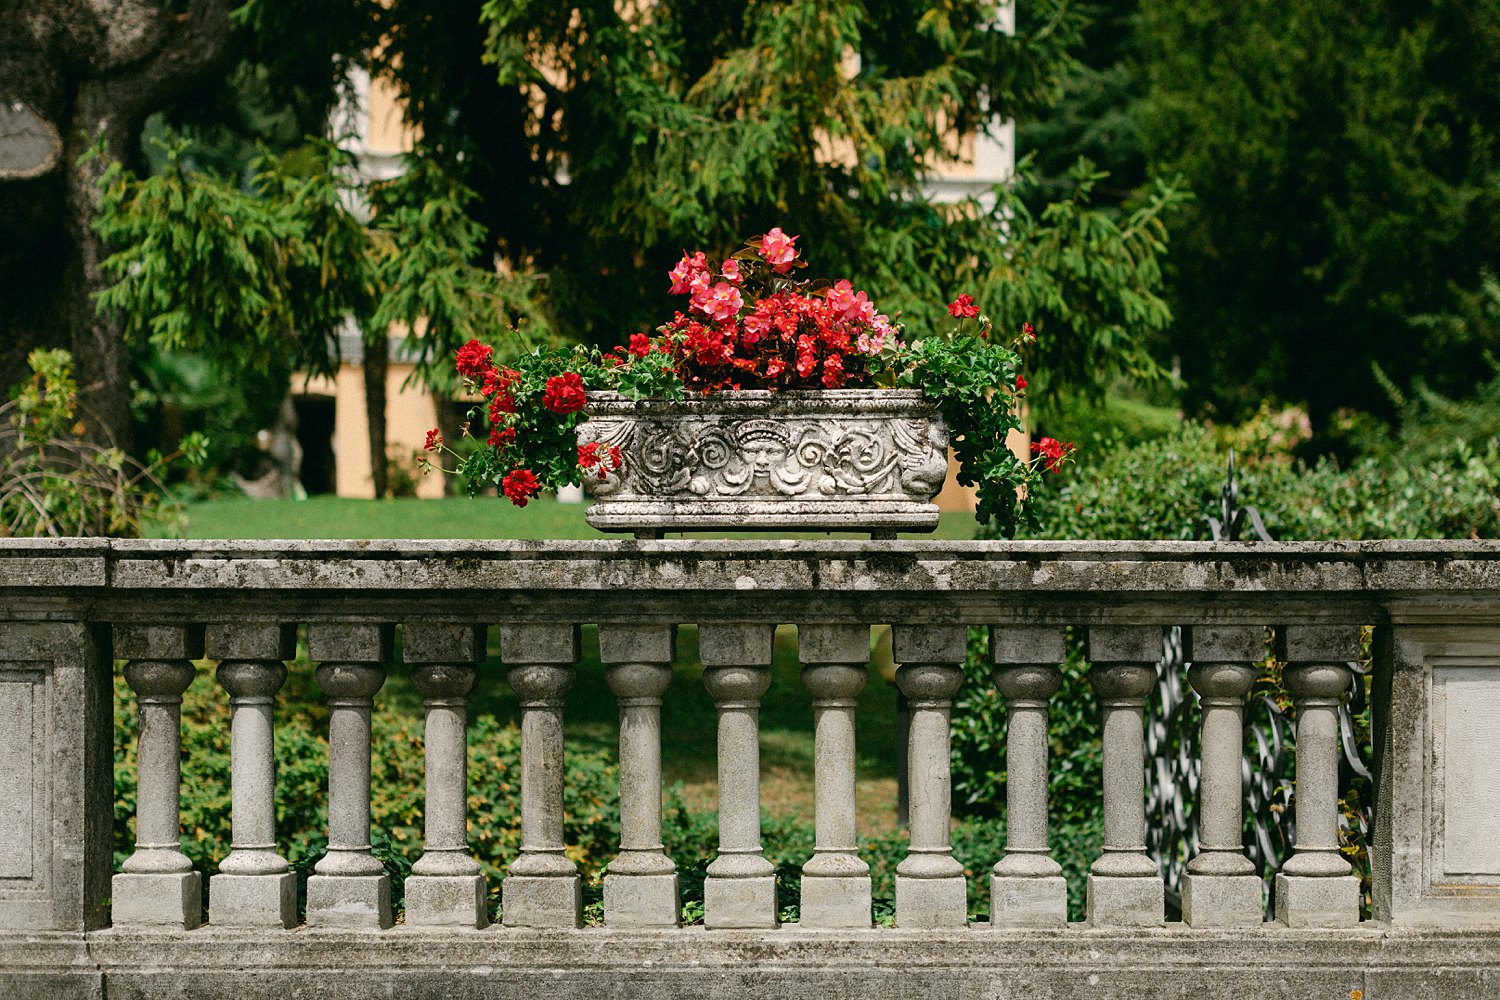 Stone flower box filled with red flowers on stone columned ledge Italy